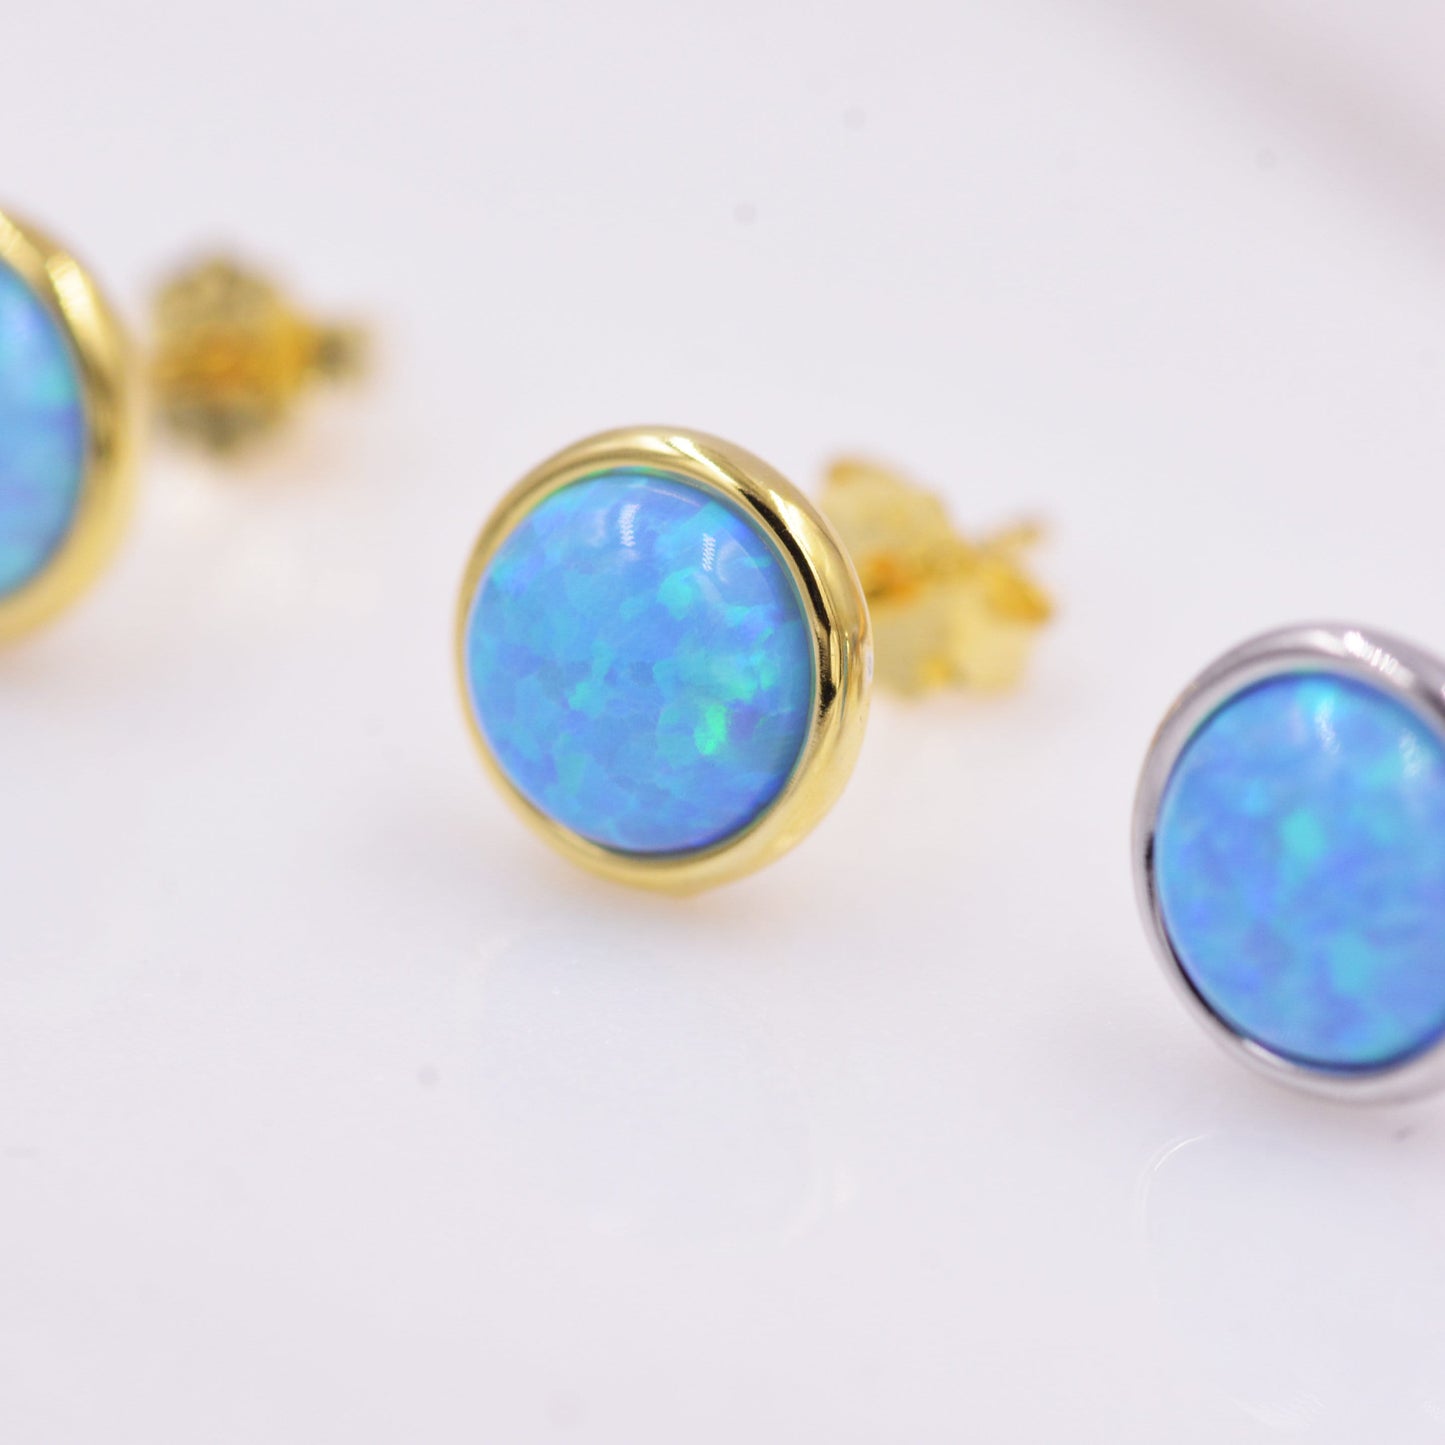 Sterling Silver Blue Opal  Stone Crystal Stud Earrings. Gold or Silver, Round Minimalist Dot Geometric Design. bridesmaid jewellery.